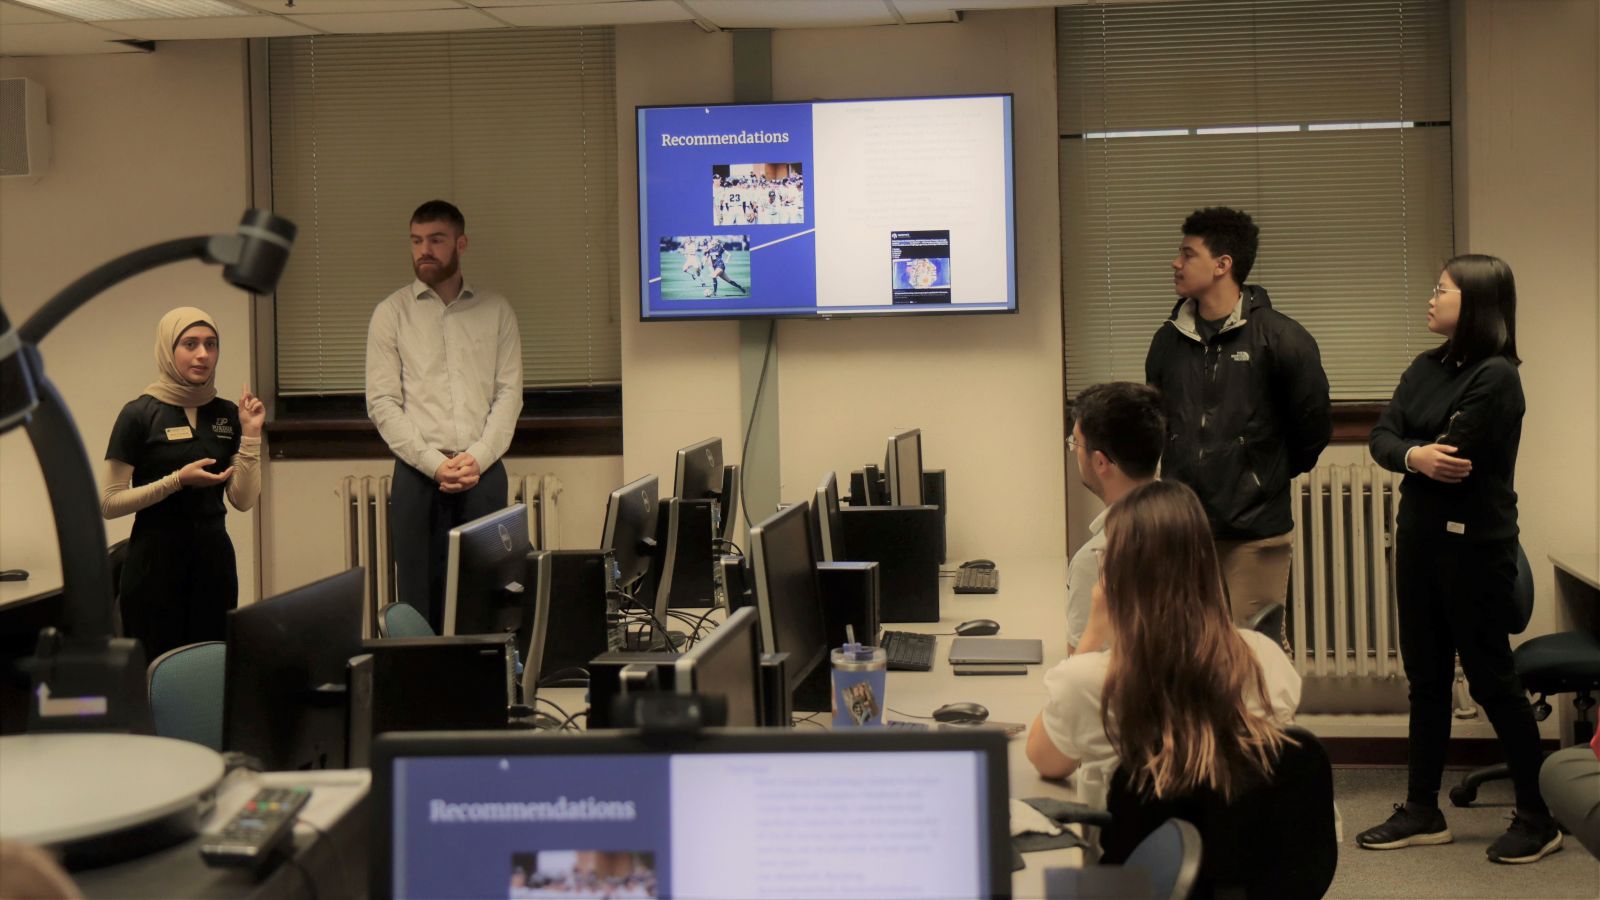 Polytechnic students Zahra Al-Awadi (left) and Devon Harmon (middle right) present with their group to Tom Brew of Boilermakers Country using a SWOT analysis.